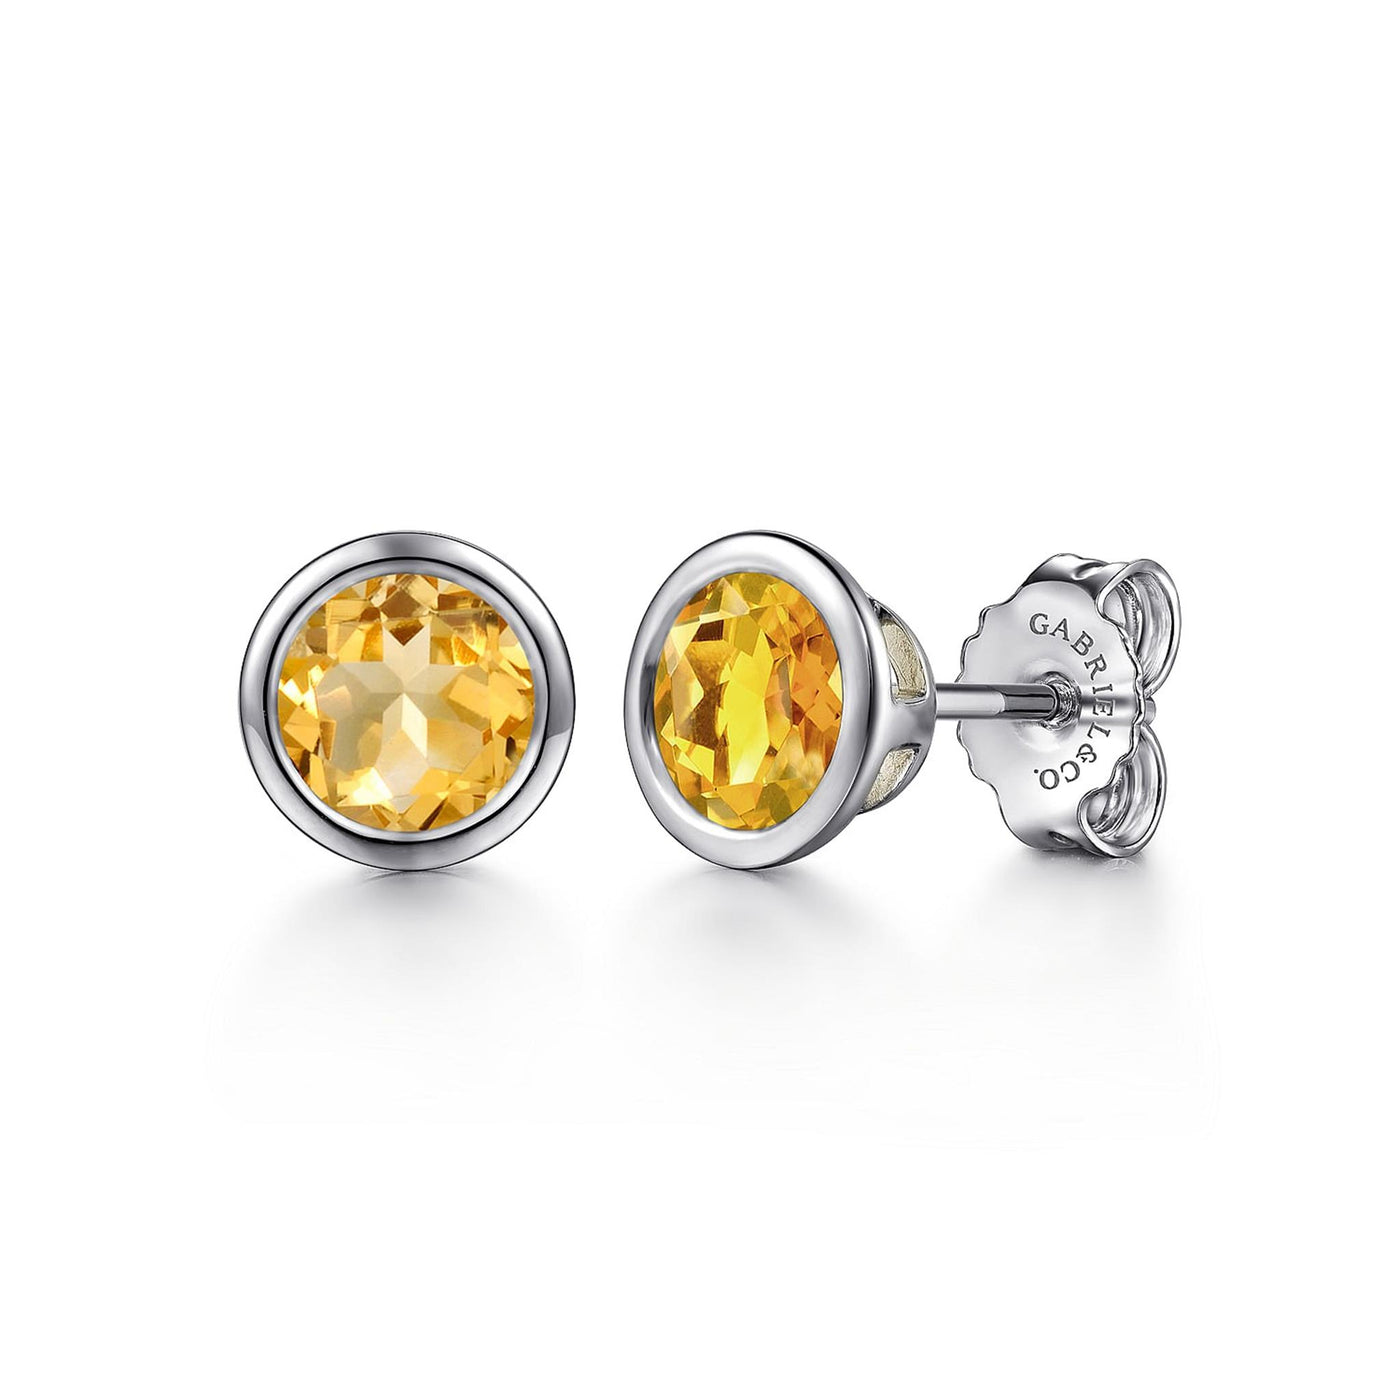 Sterling Silver 1.83ctw Solitaire Bezel Style Round Citrines Earrings